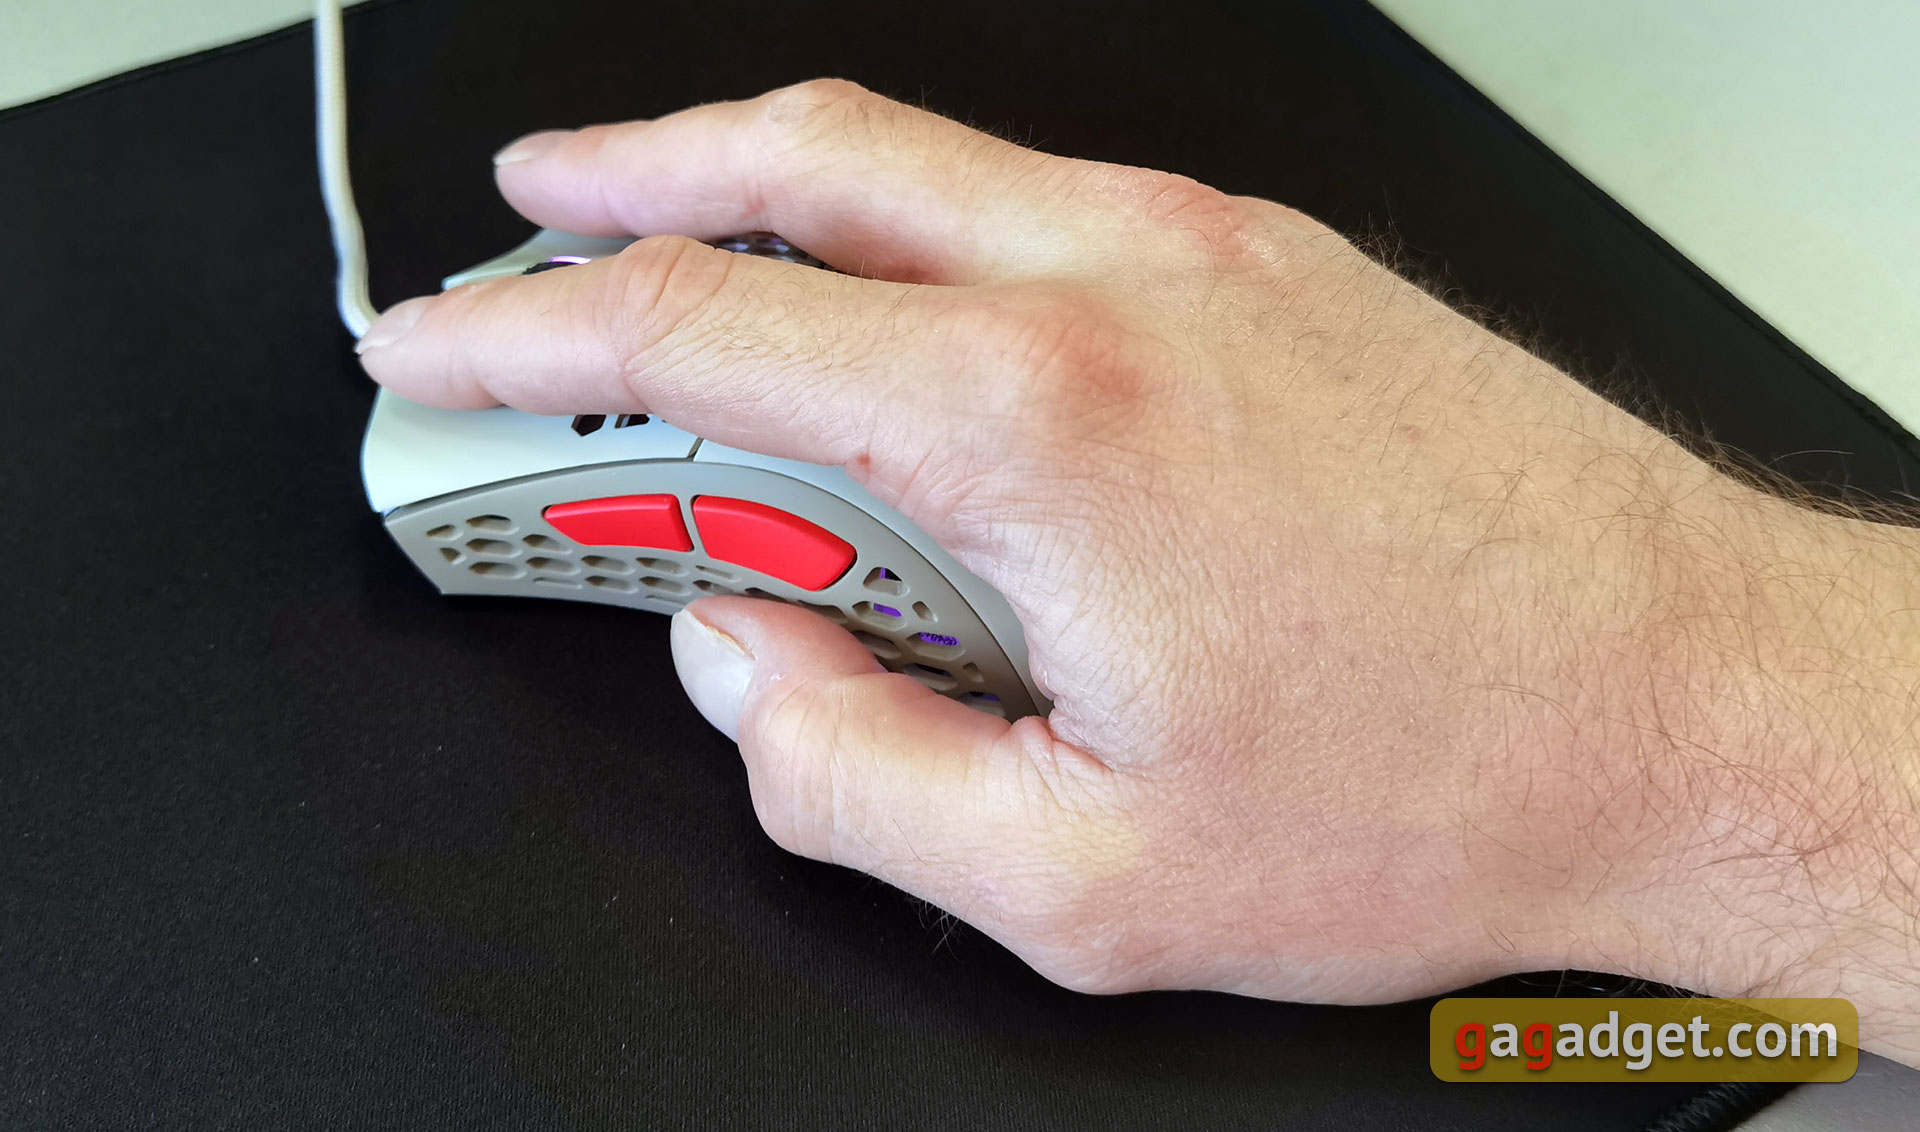 2E Gaming HyperSpeed Pro Overview: Lightweight Gaming Mouse with Excellent Sensor-16